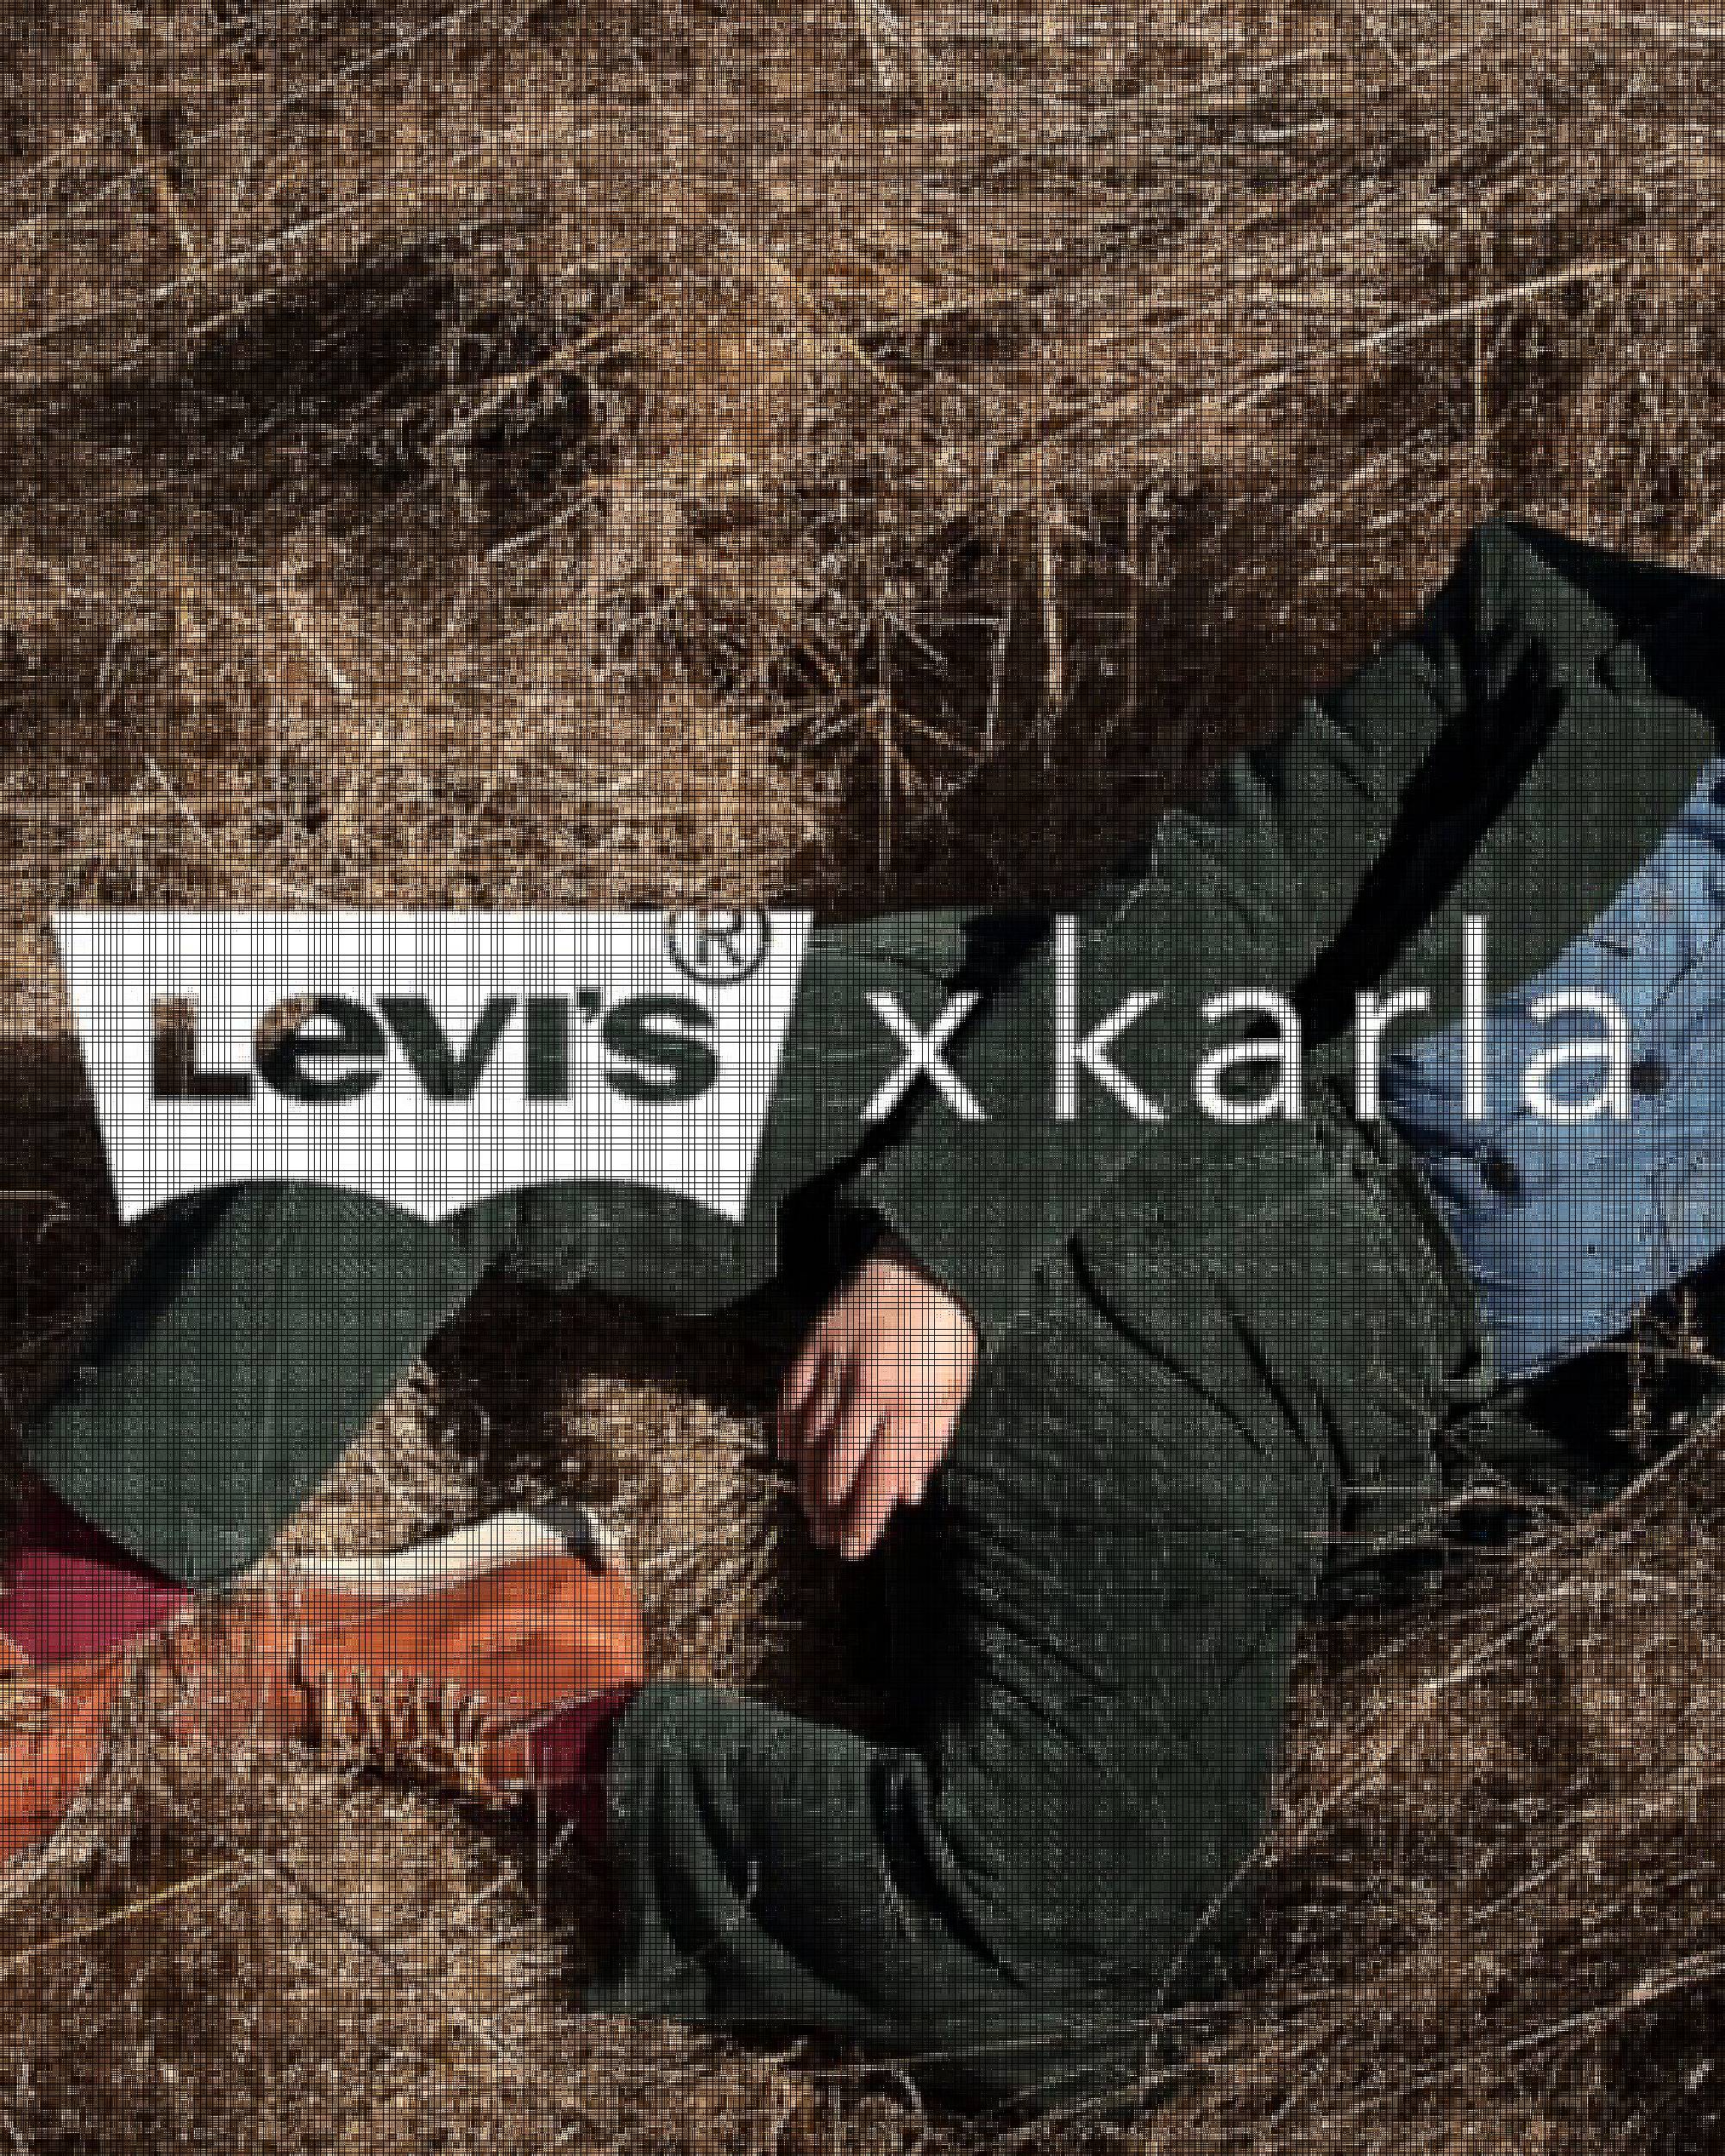 xKarla levi's collection, explore with xKarla.